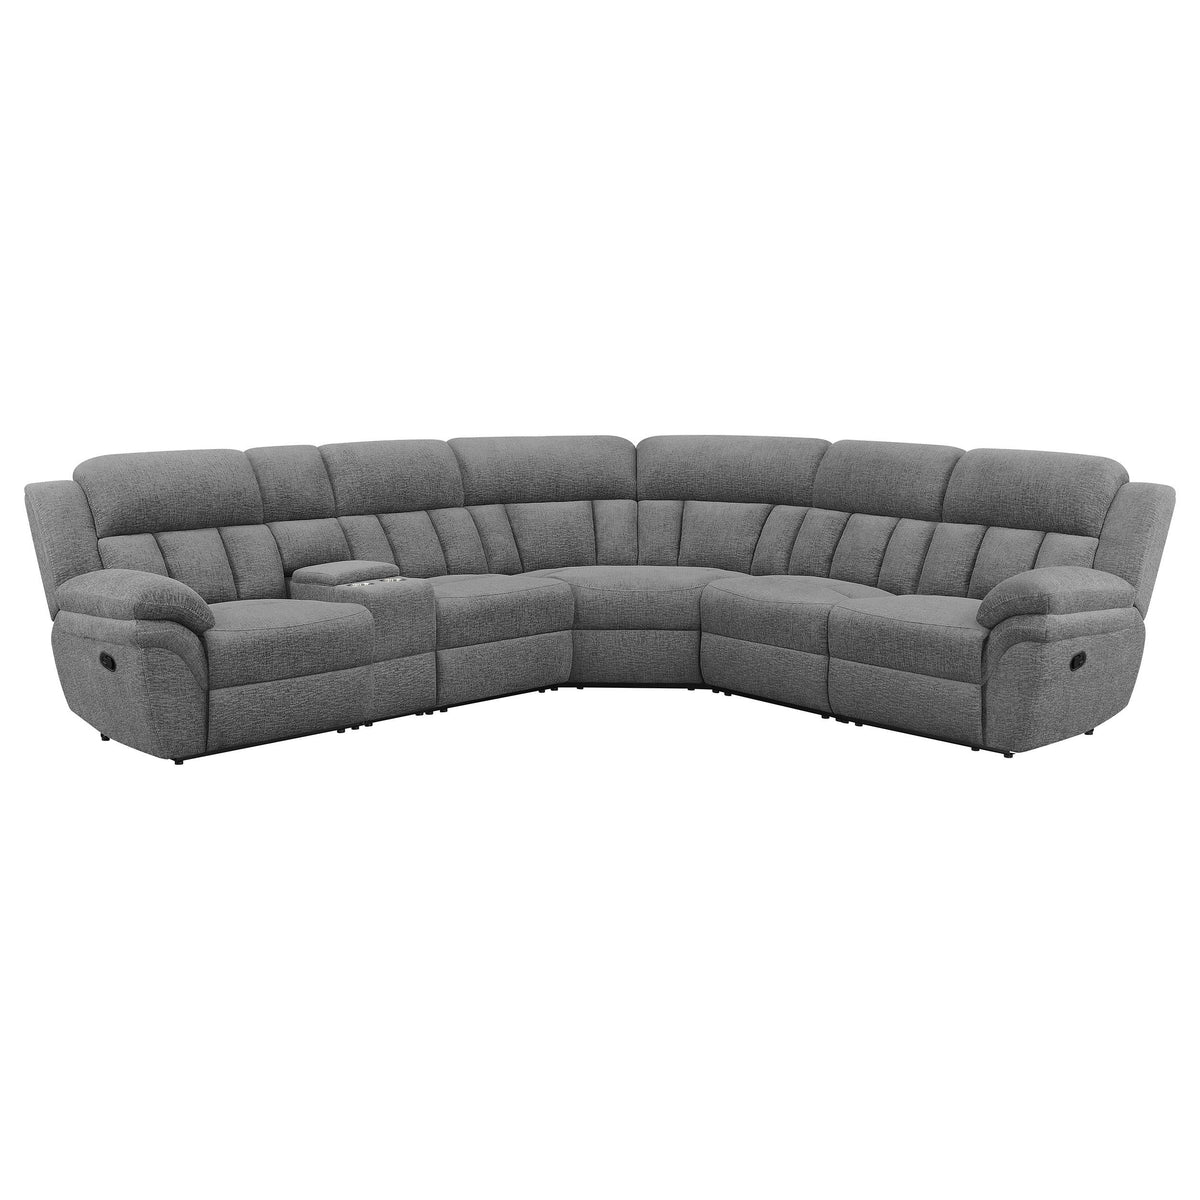 Bahrain 6-piece Upholstered Motion Sectional Charcoal  Las Vegas Furniture Stores